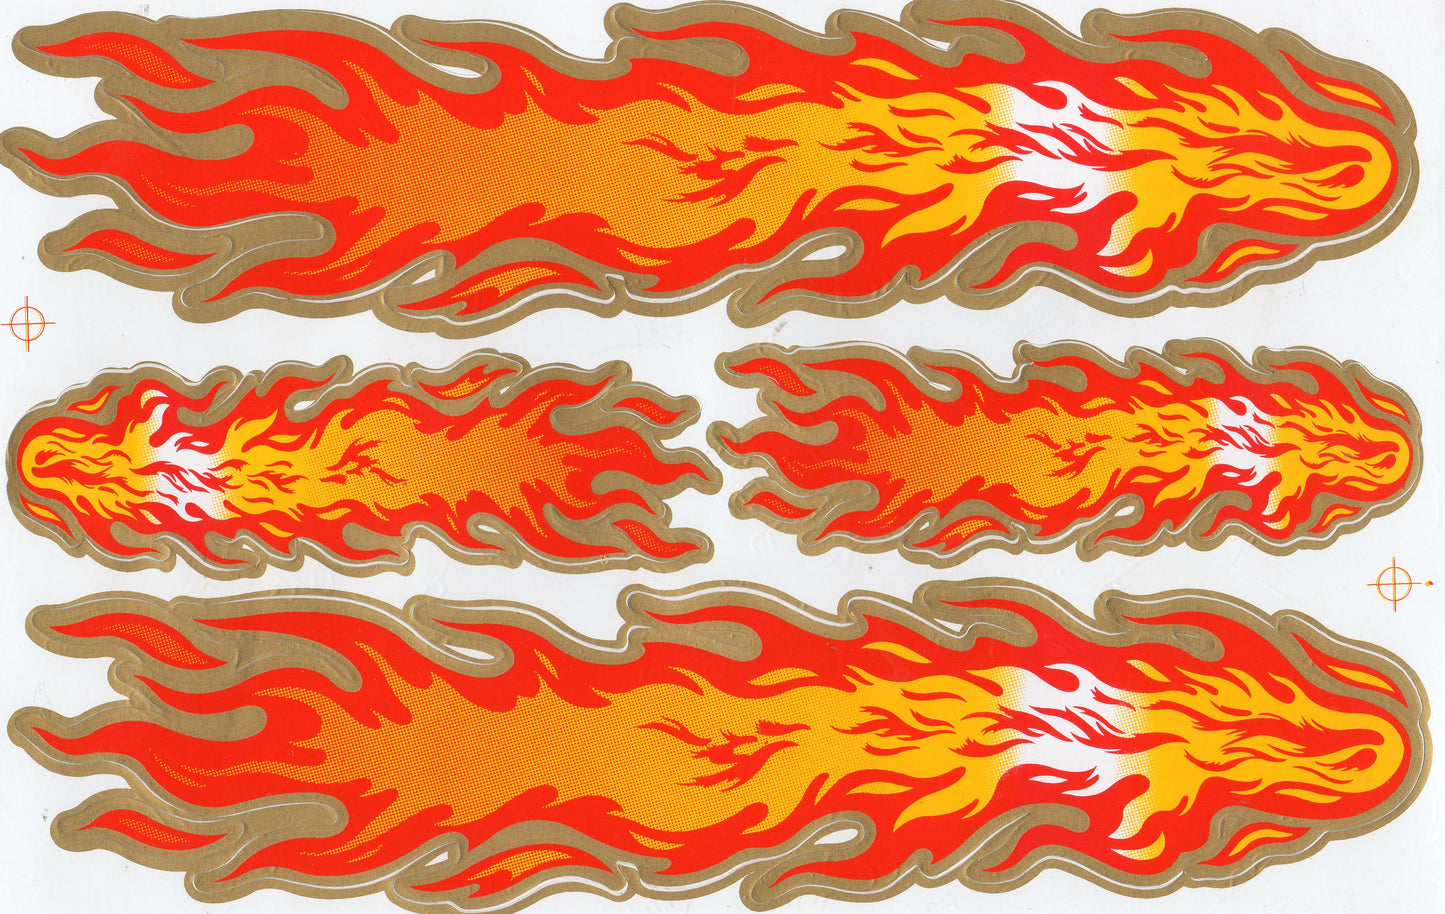 Flames fire orange sticker motorcycle scooter skateboard car tuning model making self-adhesive 057